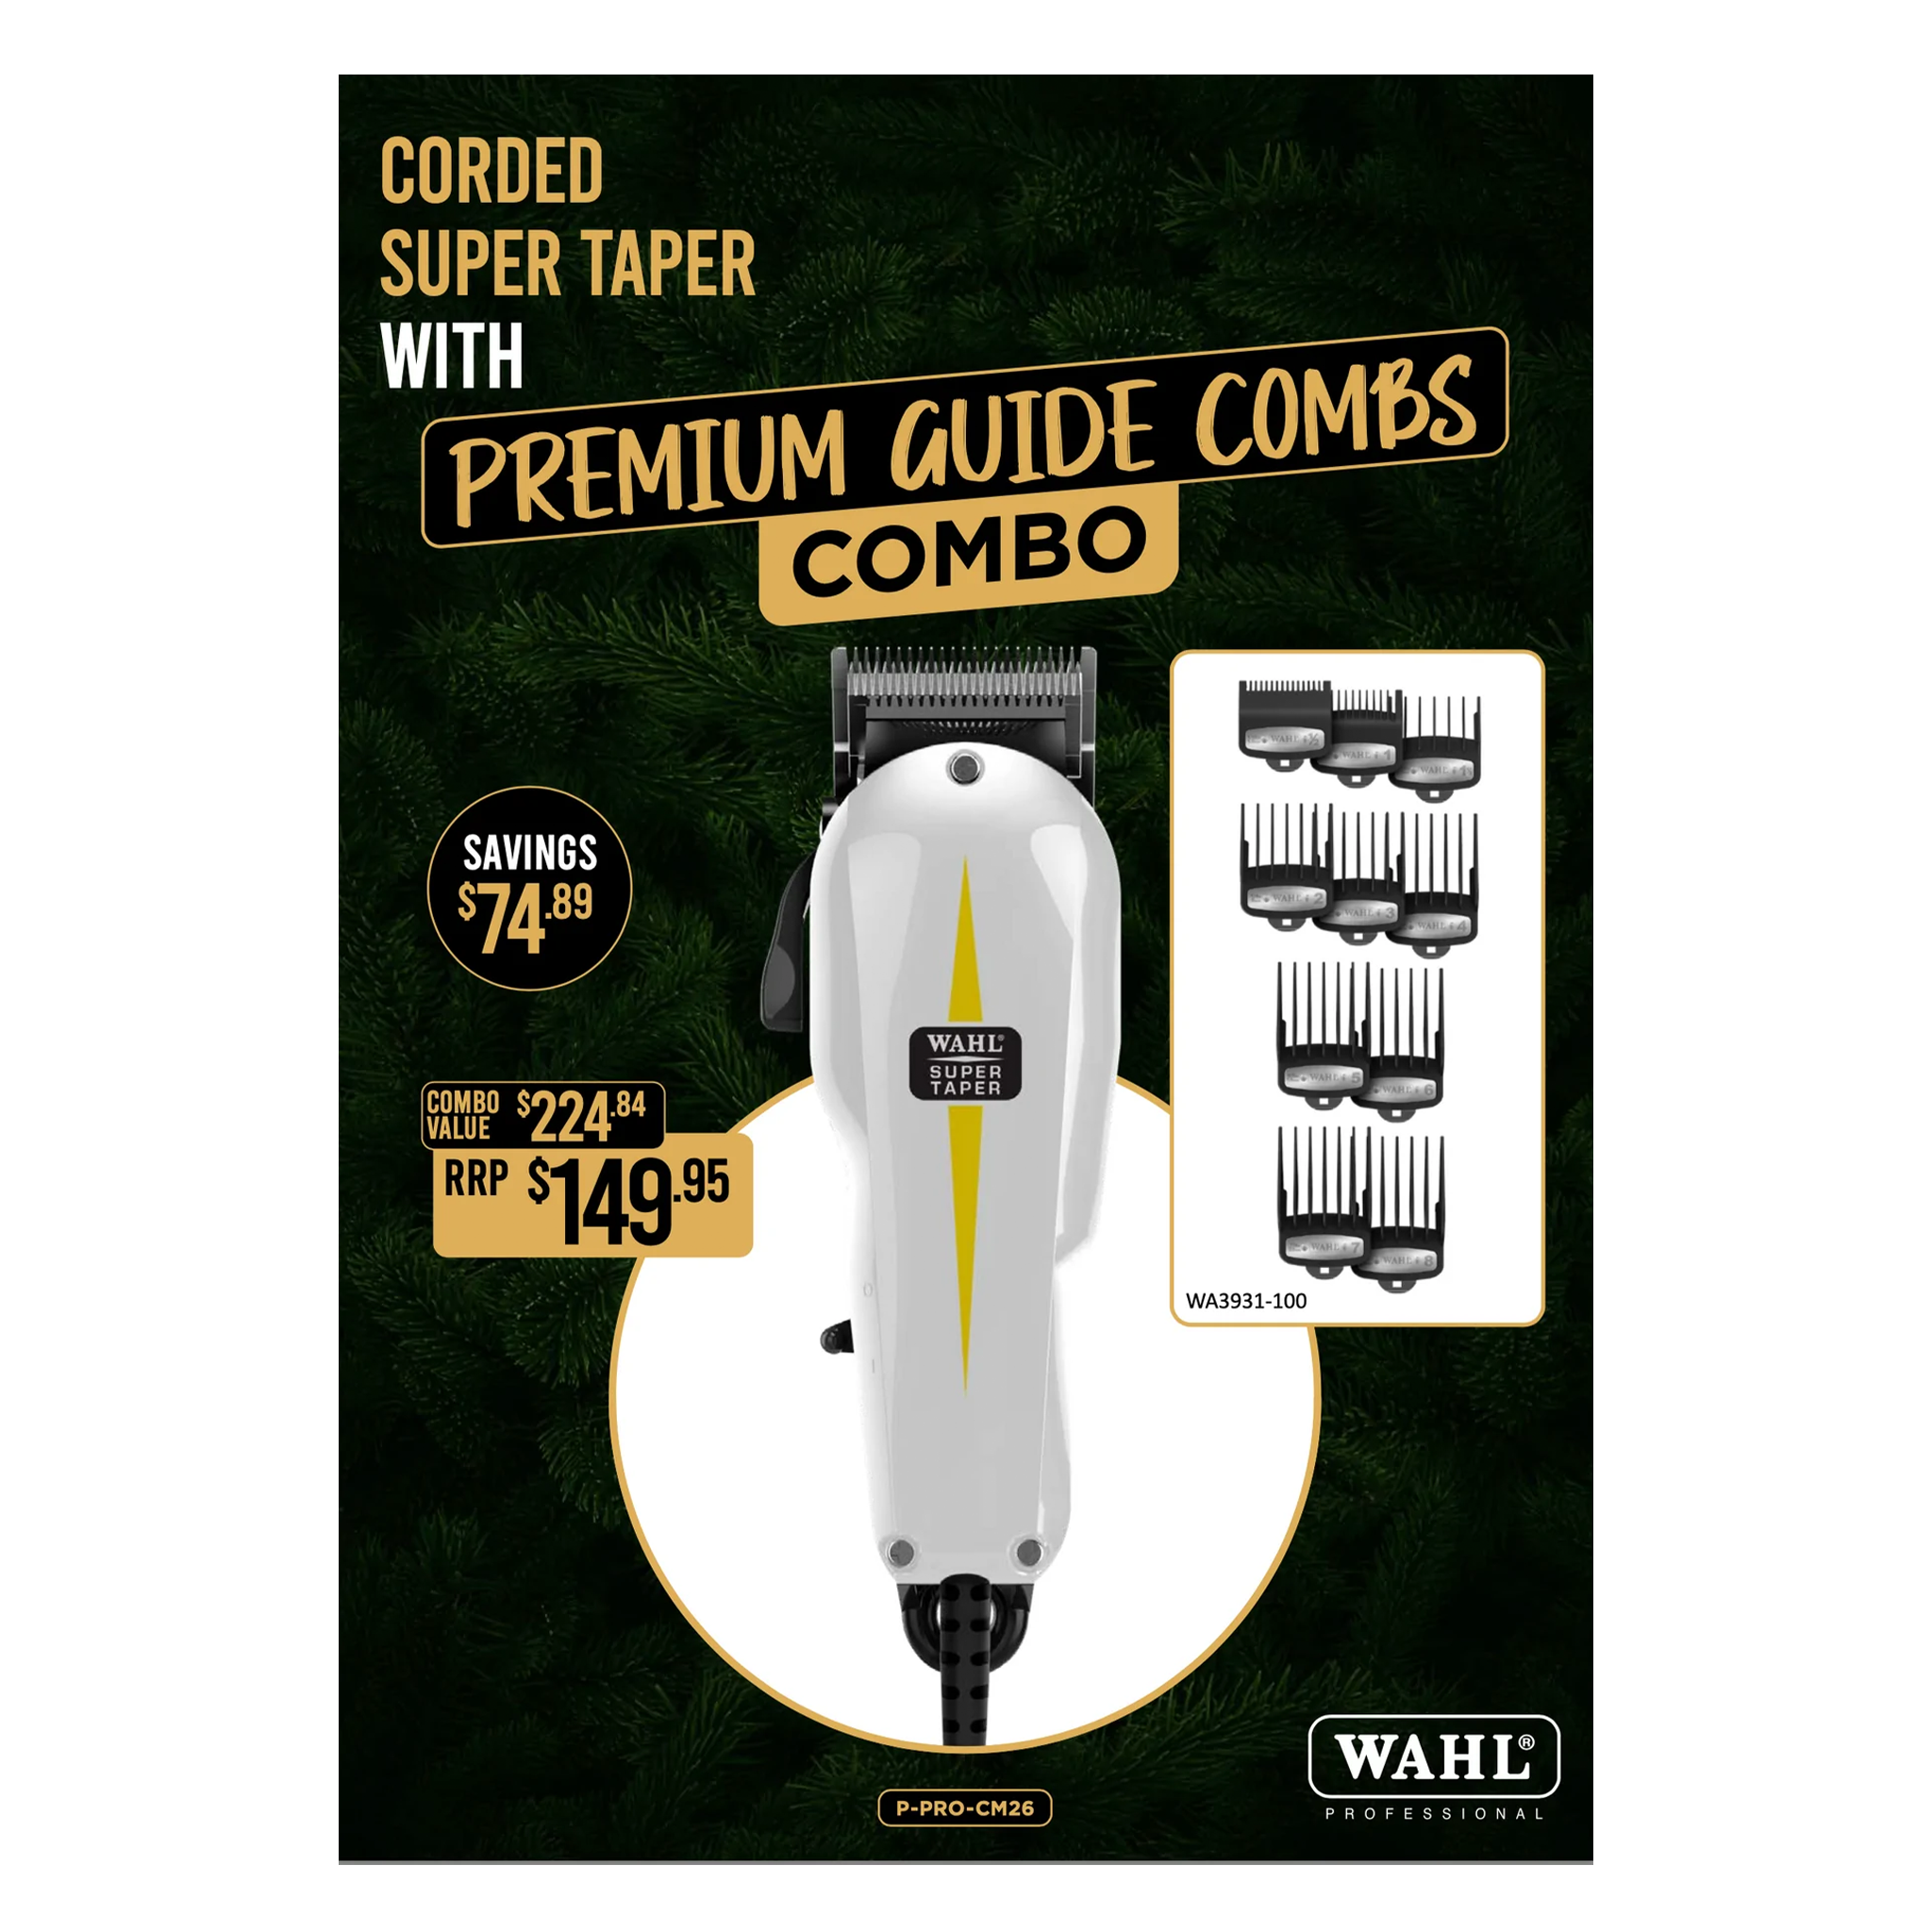 Wahl Corded Super Taper with Premium Guide Combs Combo